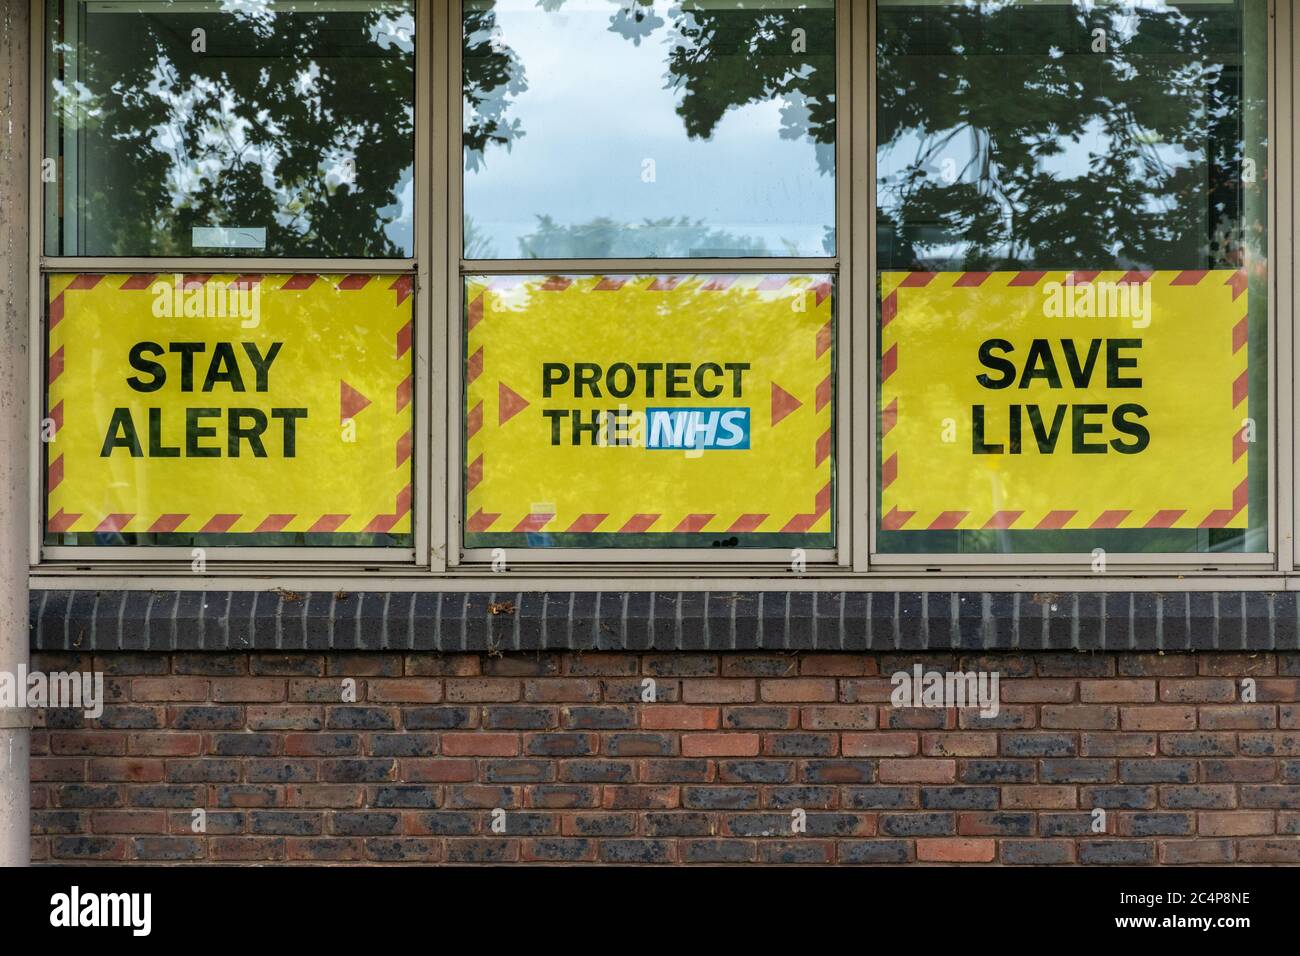 Stay Alert, Protect the NHS, Save Lives, UK government slogan during the coronavirus covid-19 pandemic, June 2020, on local council office window Stock Photo